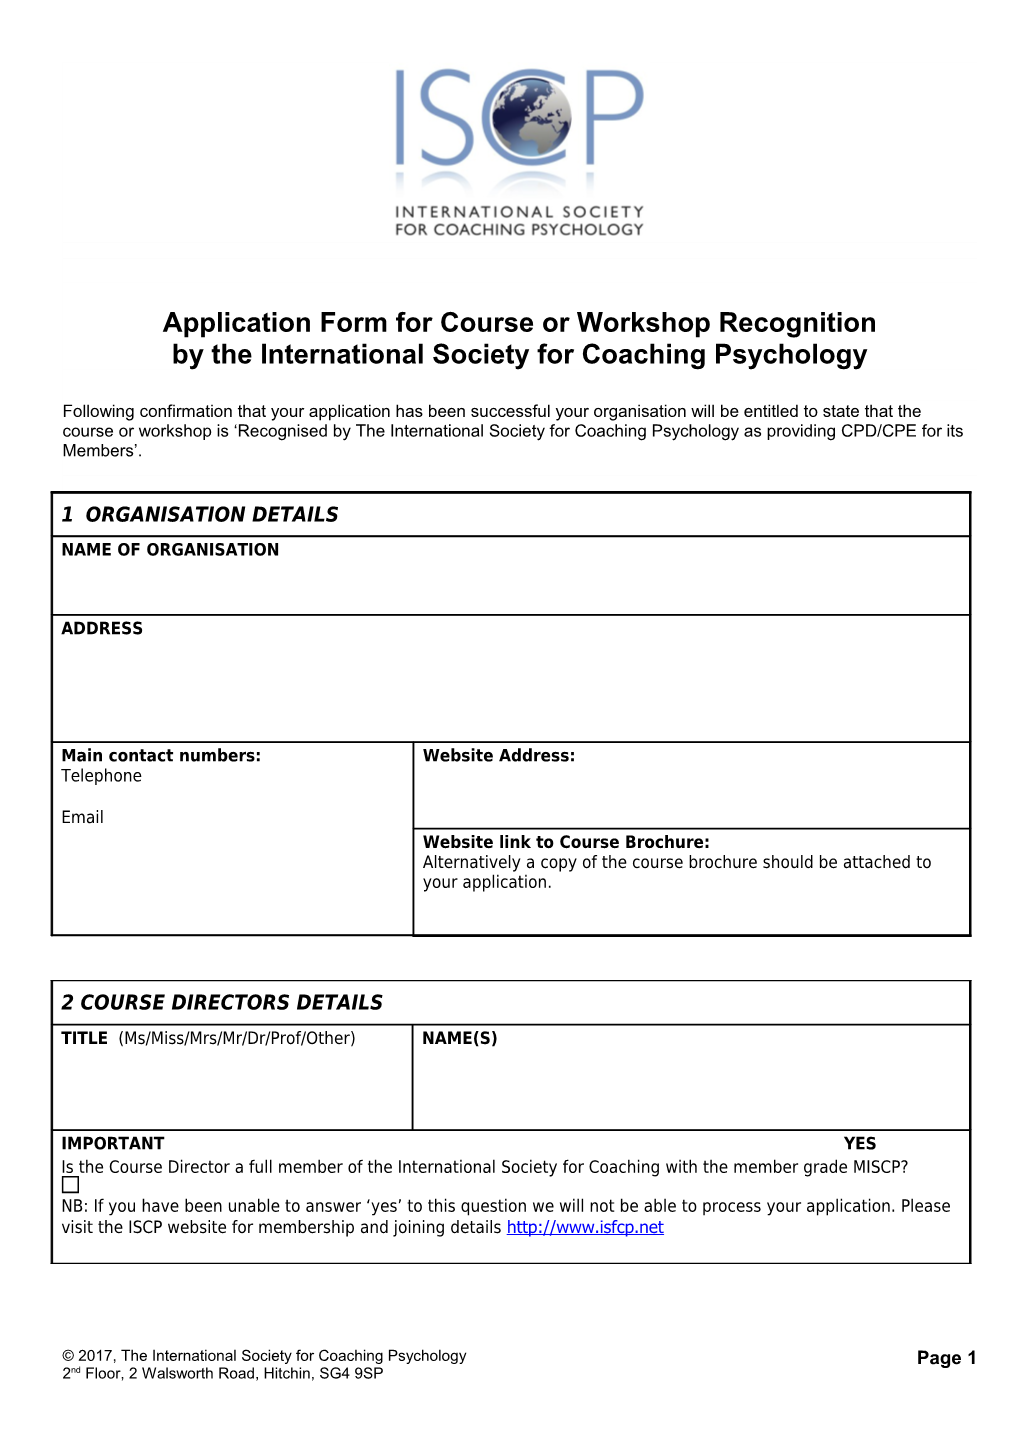 Application Form for Membership of SCP